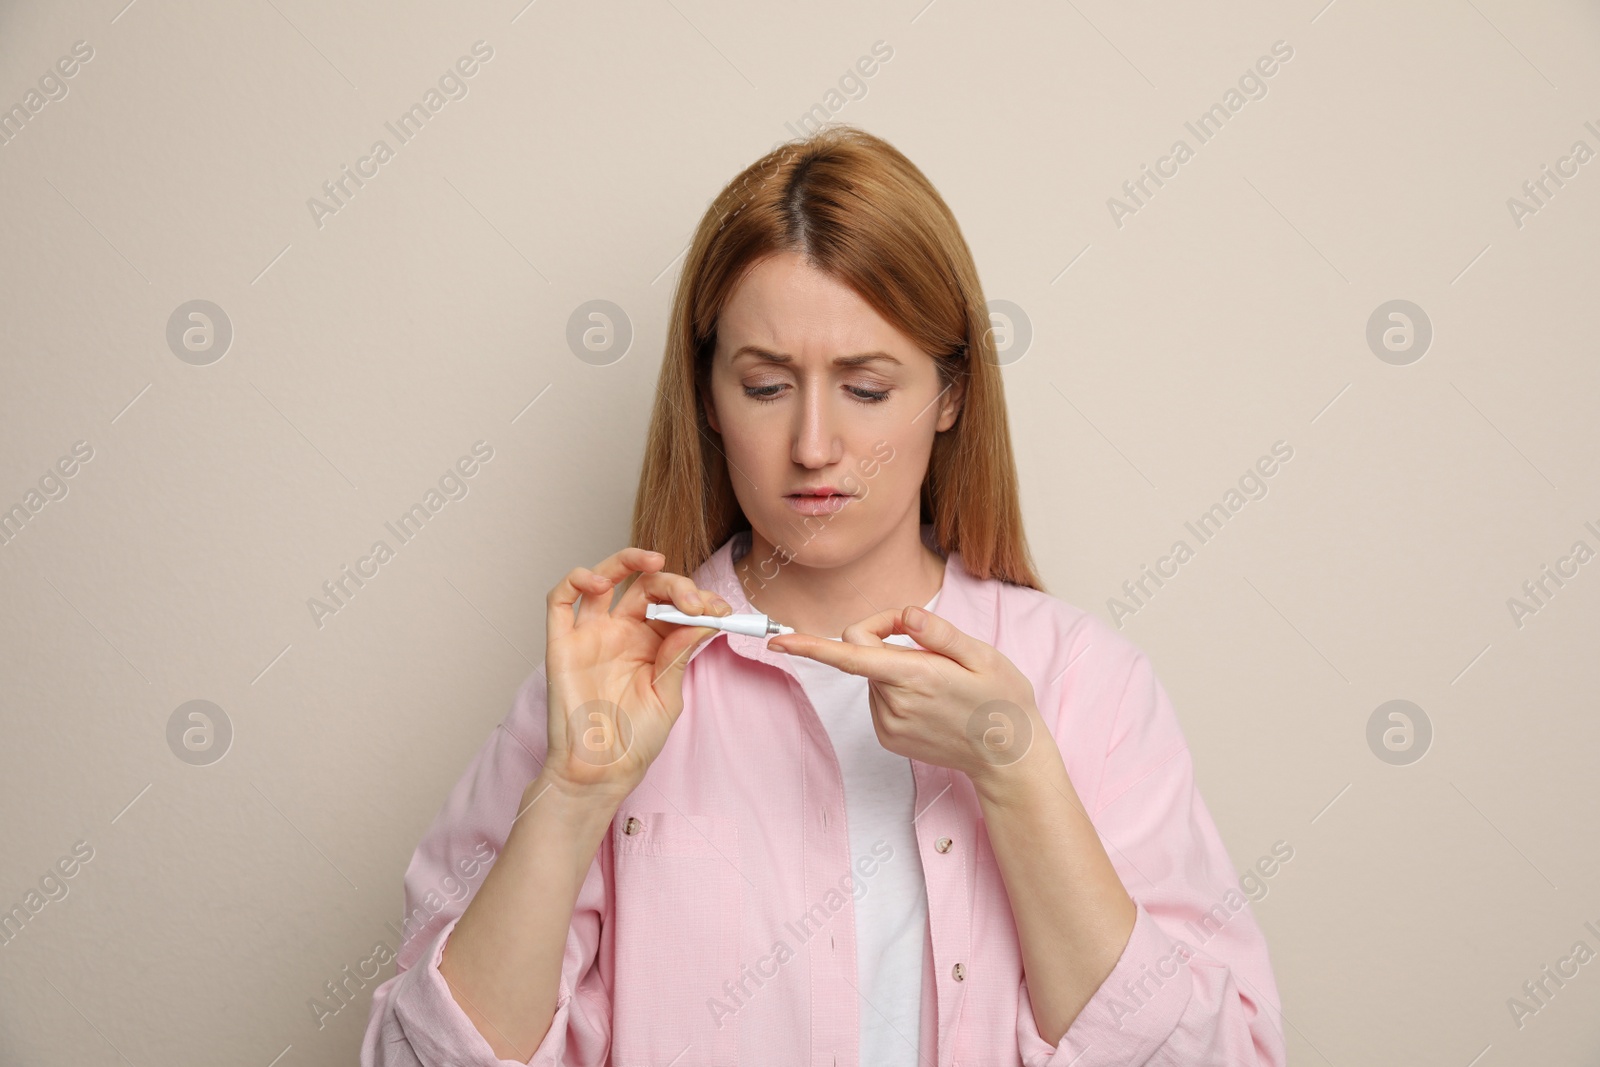 Photo of Woman with herpes applying cream on lips against beige background